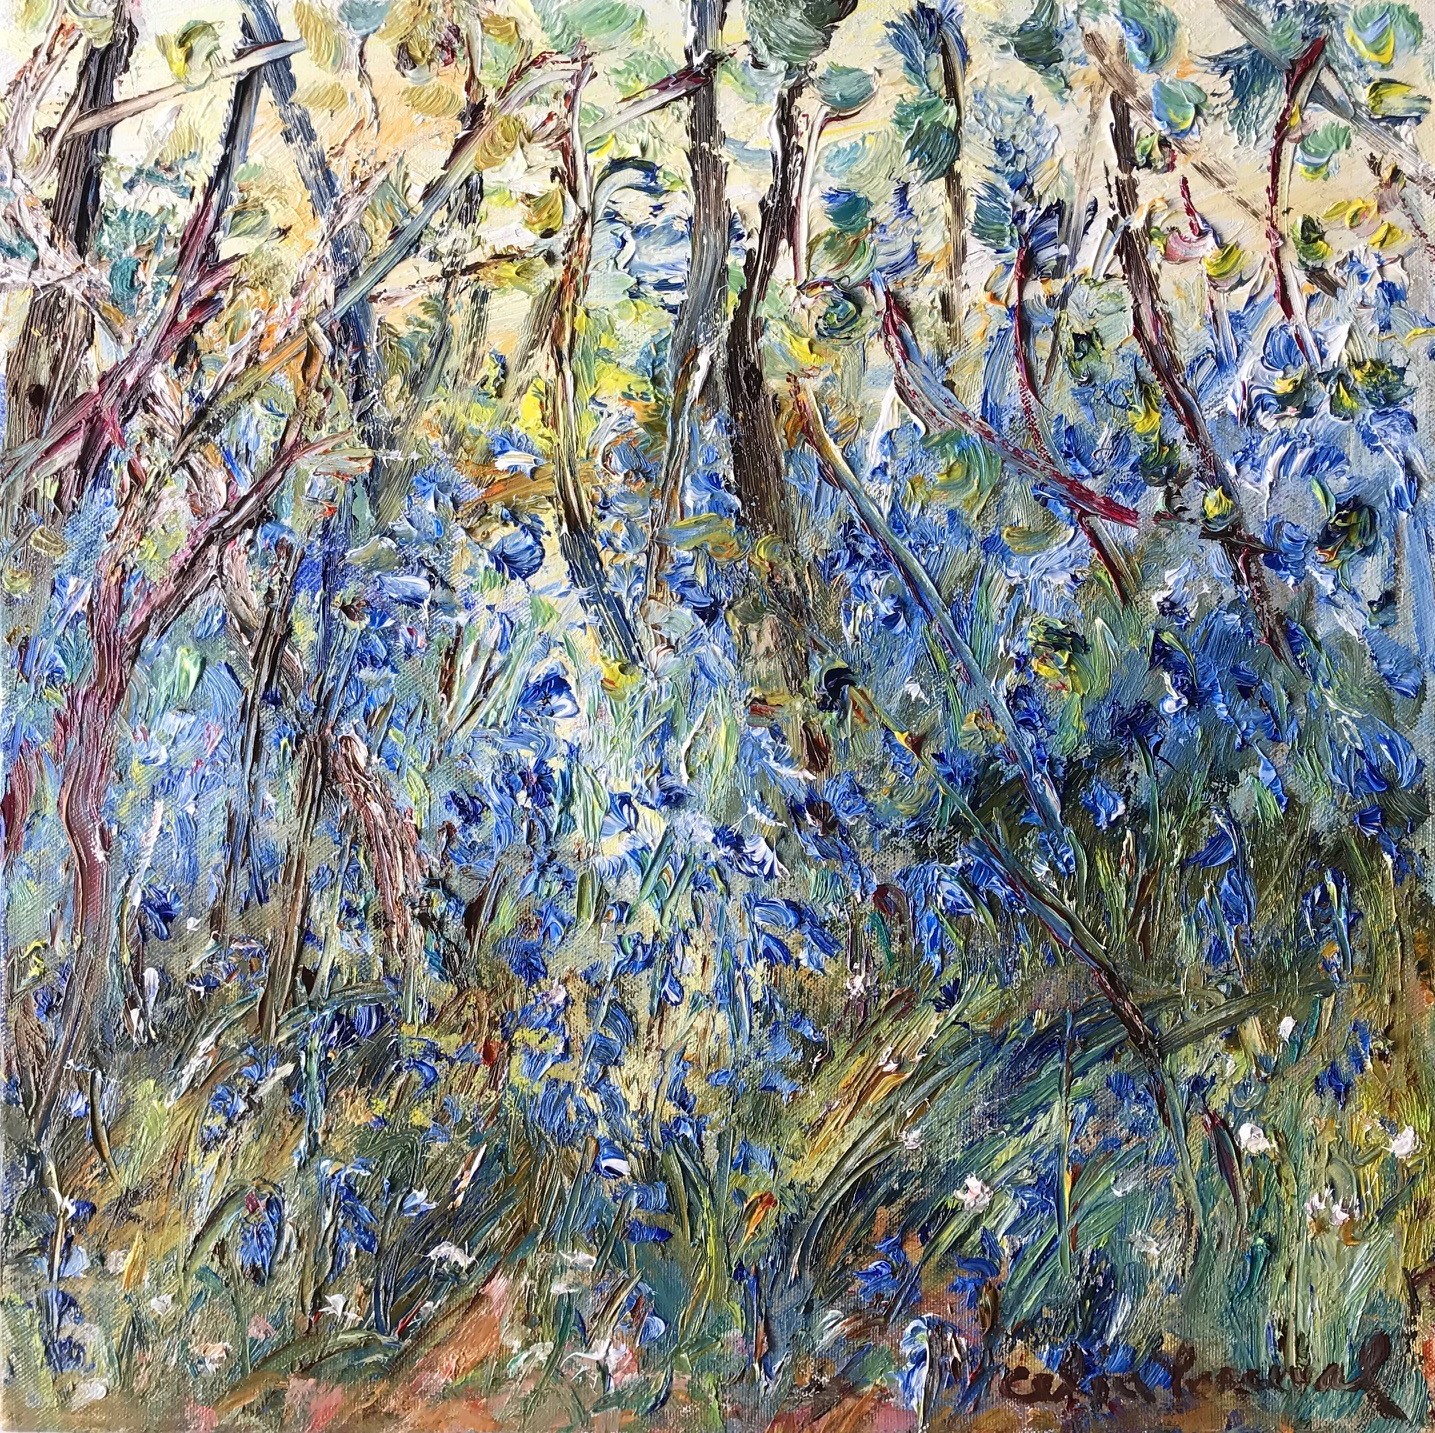 Perceval_Bluebells in Rodd Wood_oil on canvas_ 40x40_Master